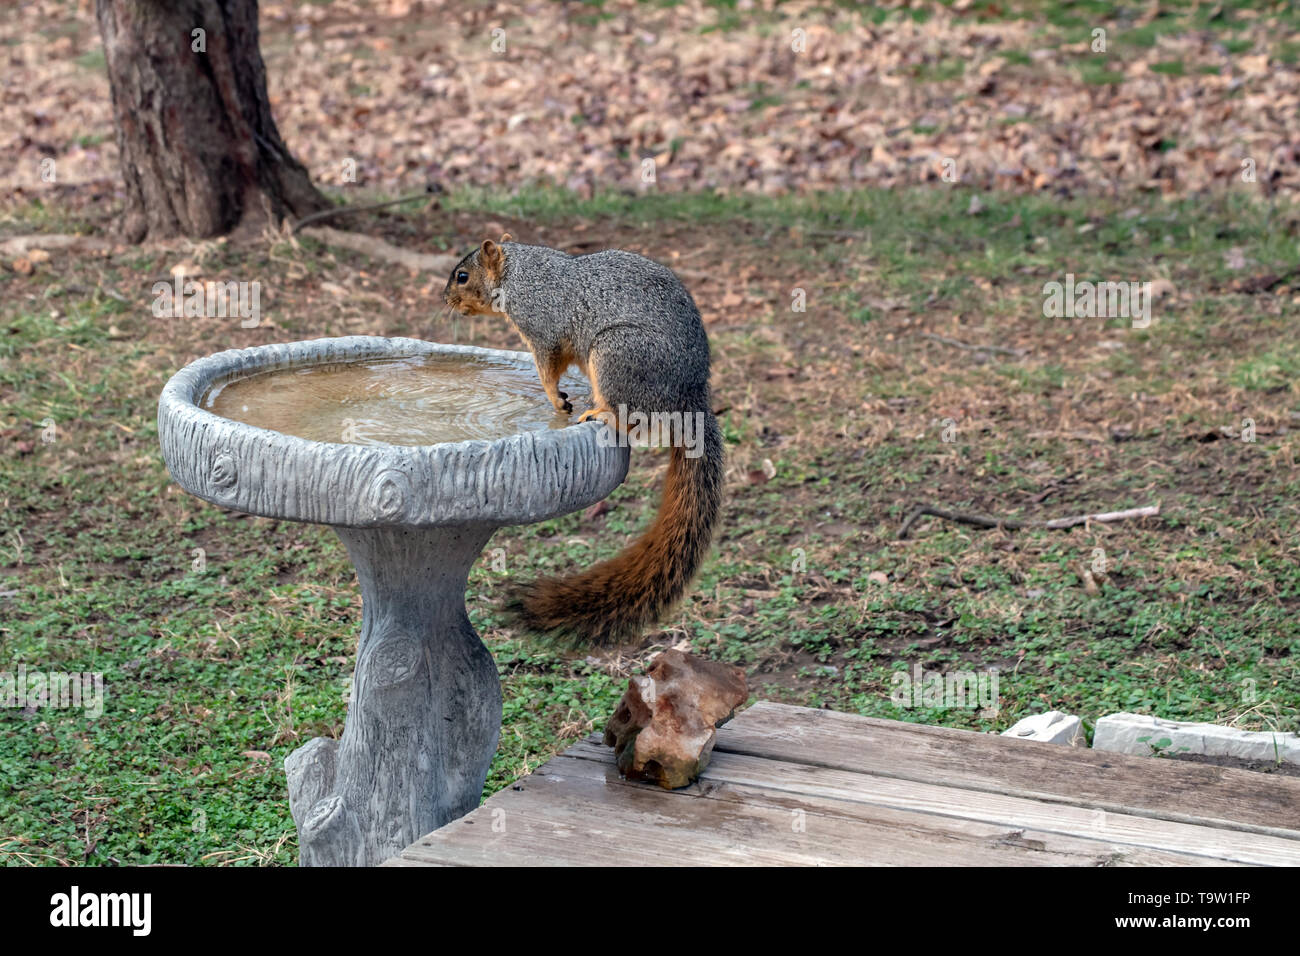 A squirrel takes advantage of the bird bath on a cool day in Missouri. Bokeh background. Stock Photo